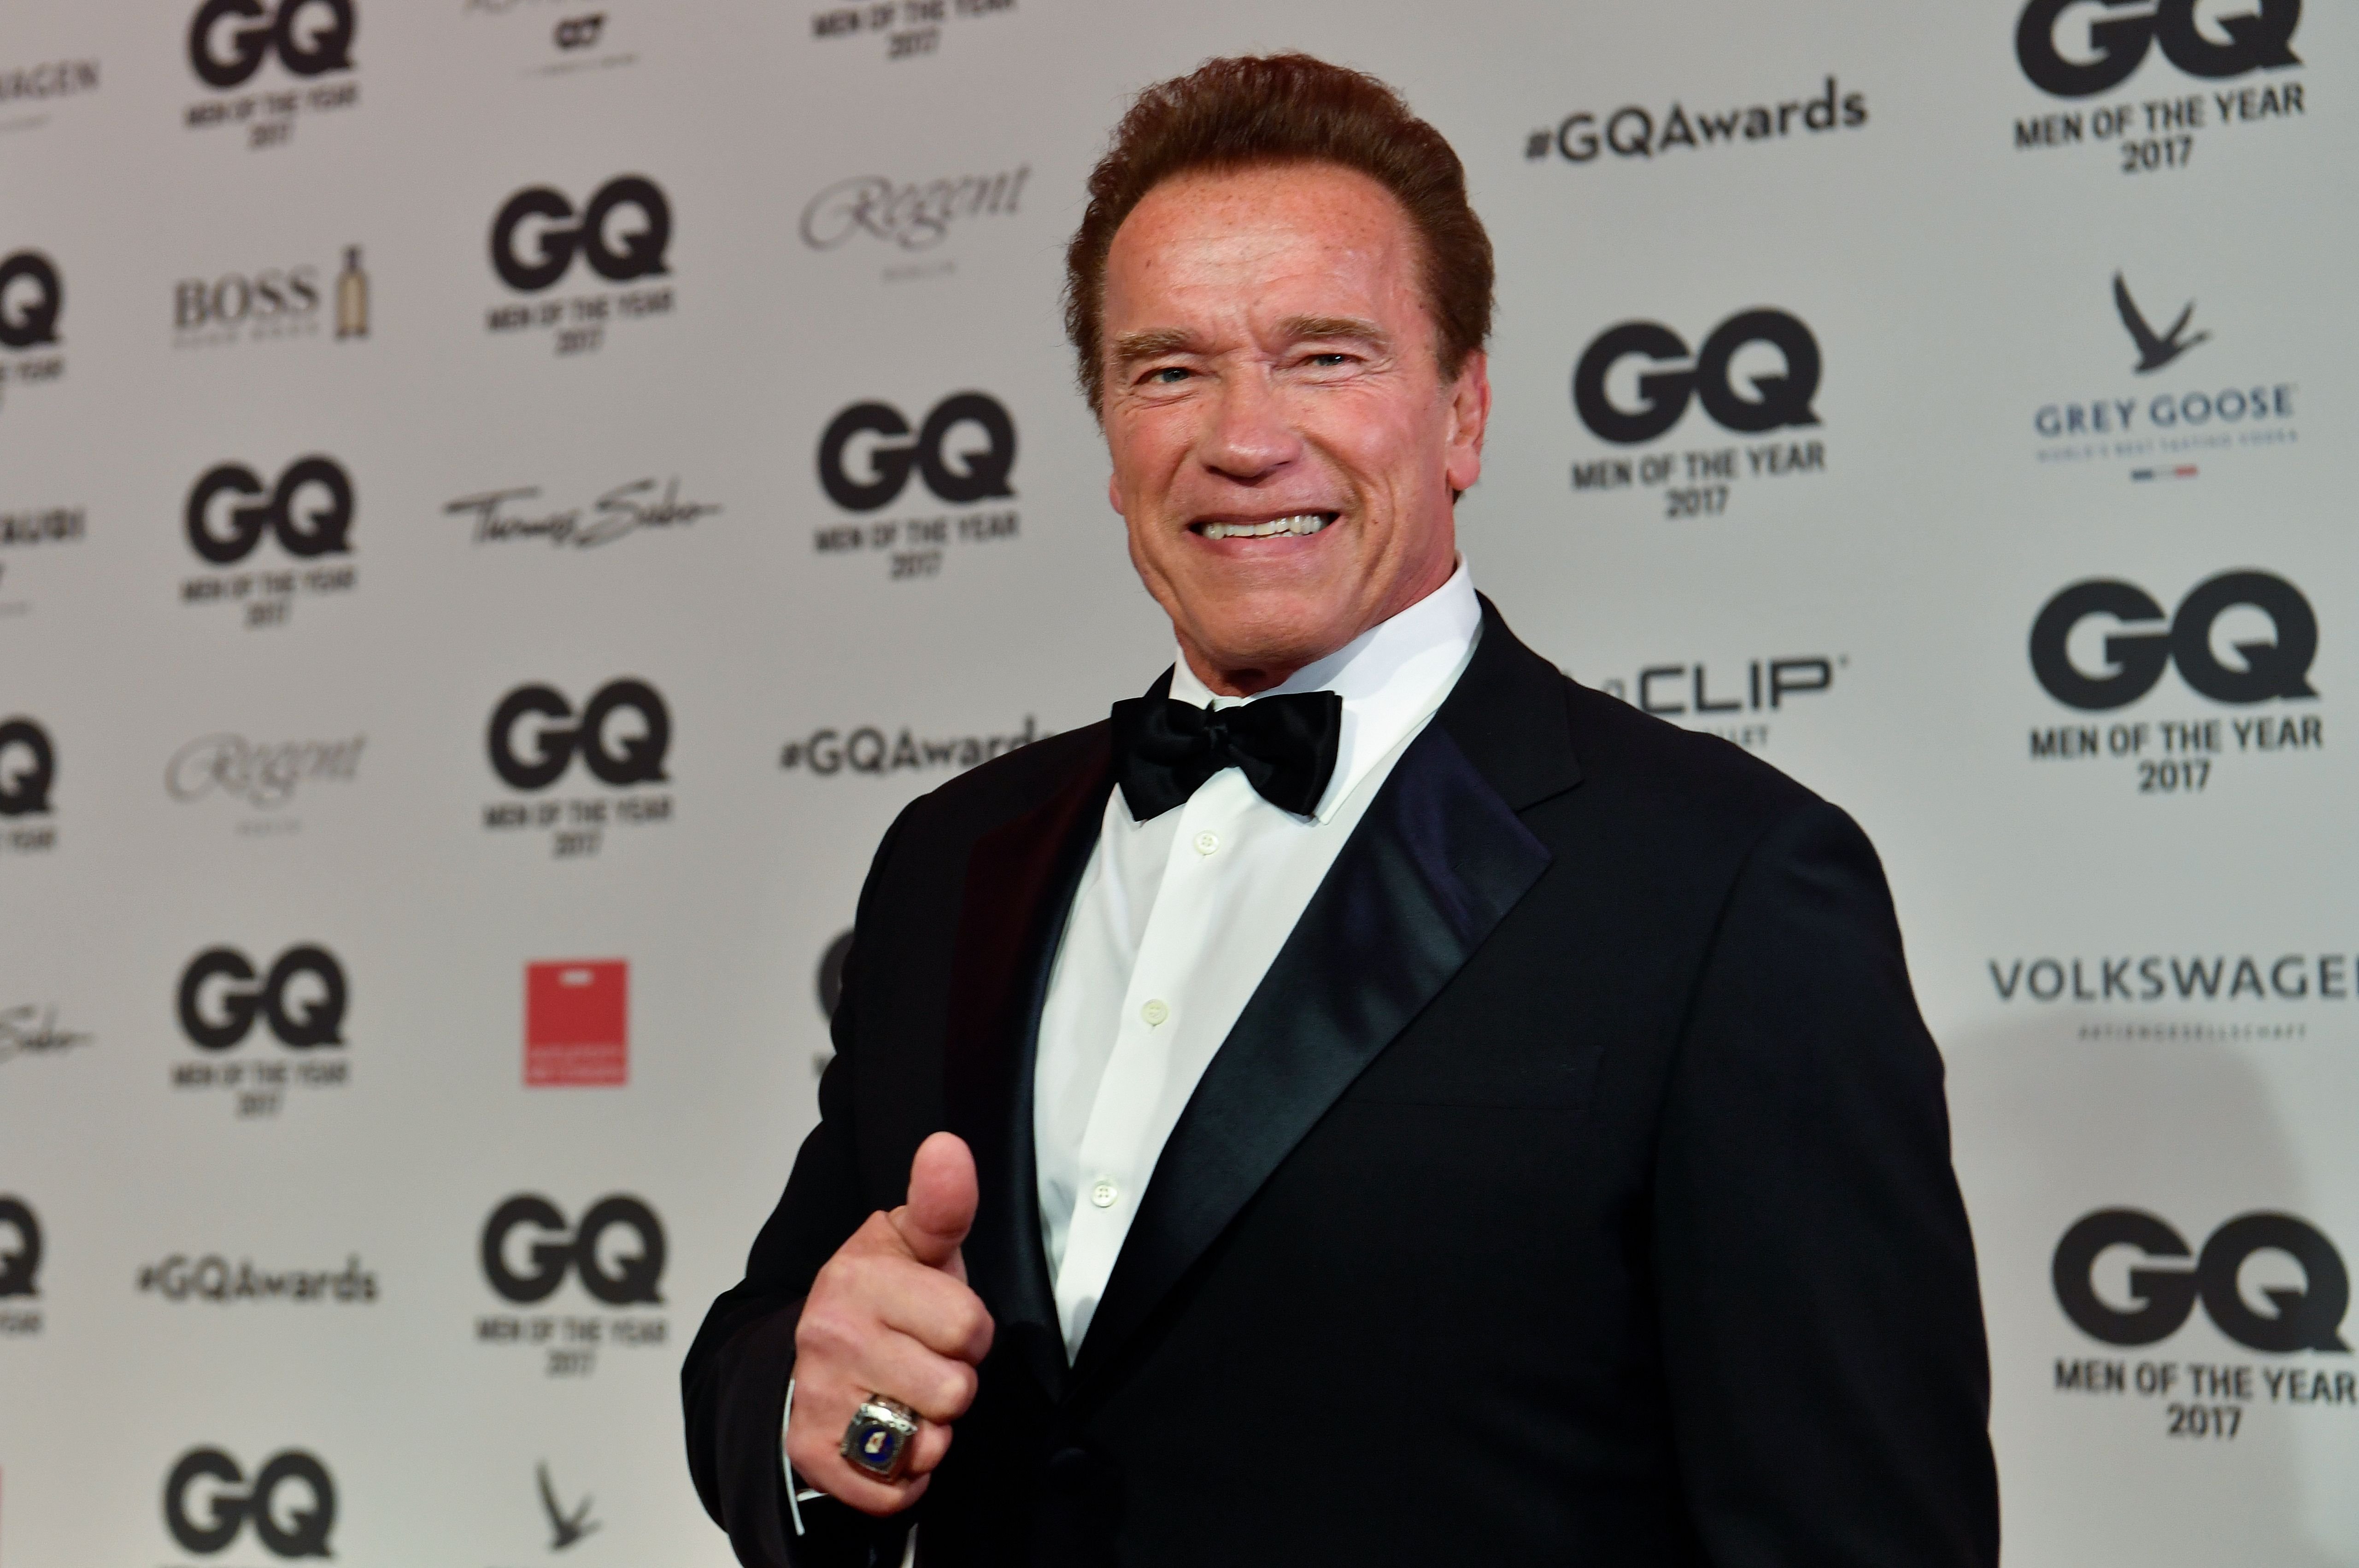 Actor and former California governor Arnold Schwarzenegger poses on the red carpet as he arrives for the GQ "Men Of The Year" awards ceremony in Berlin where he will be honoured as "Legend of the Century" on November 9, 2017 | Source: Getty Images